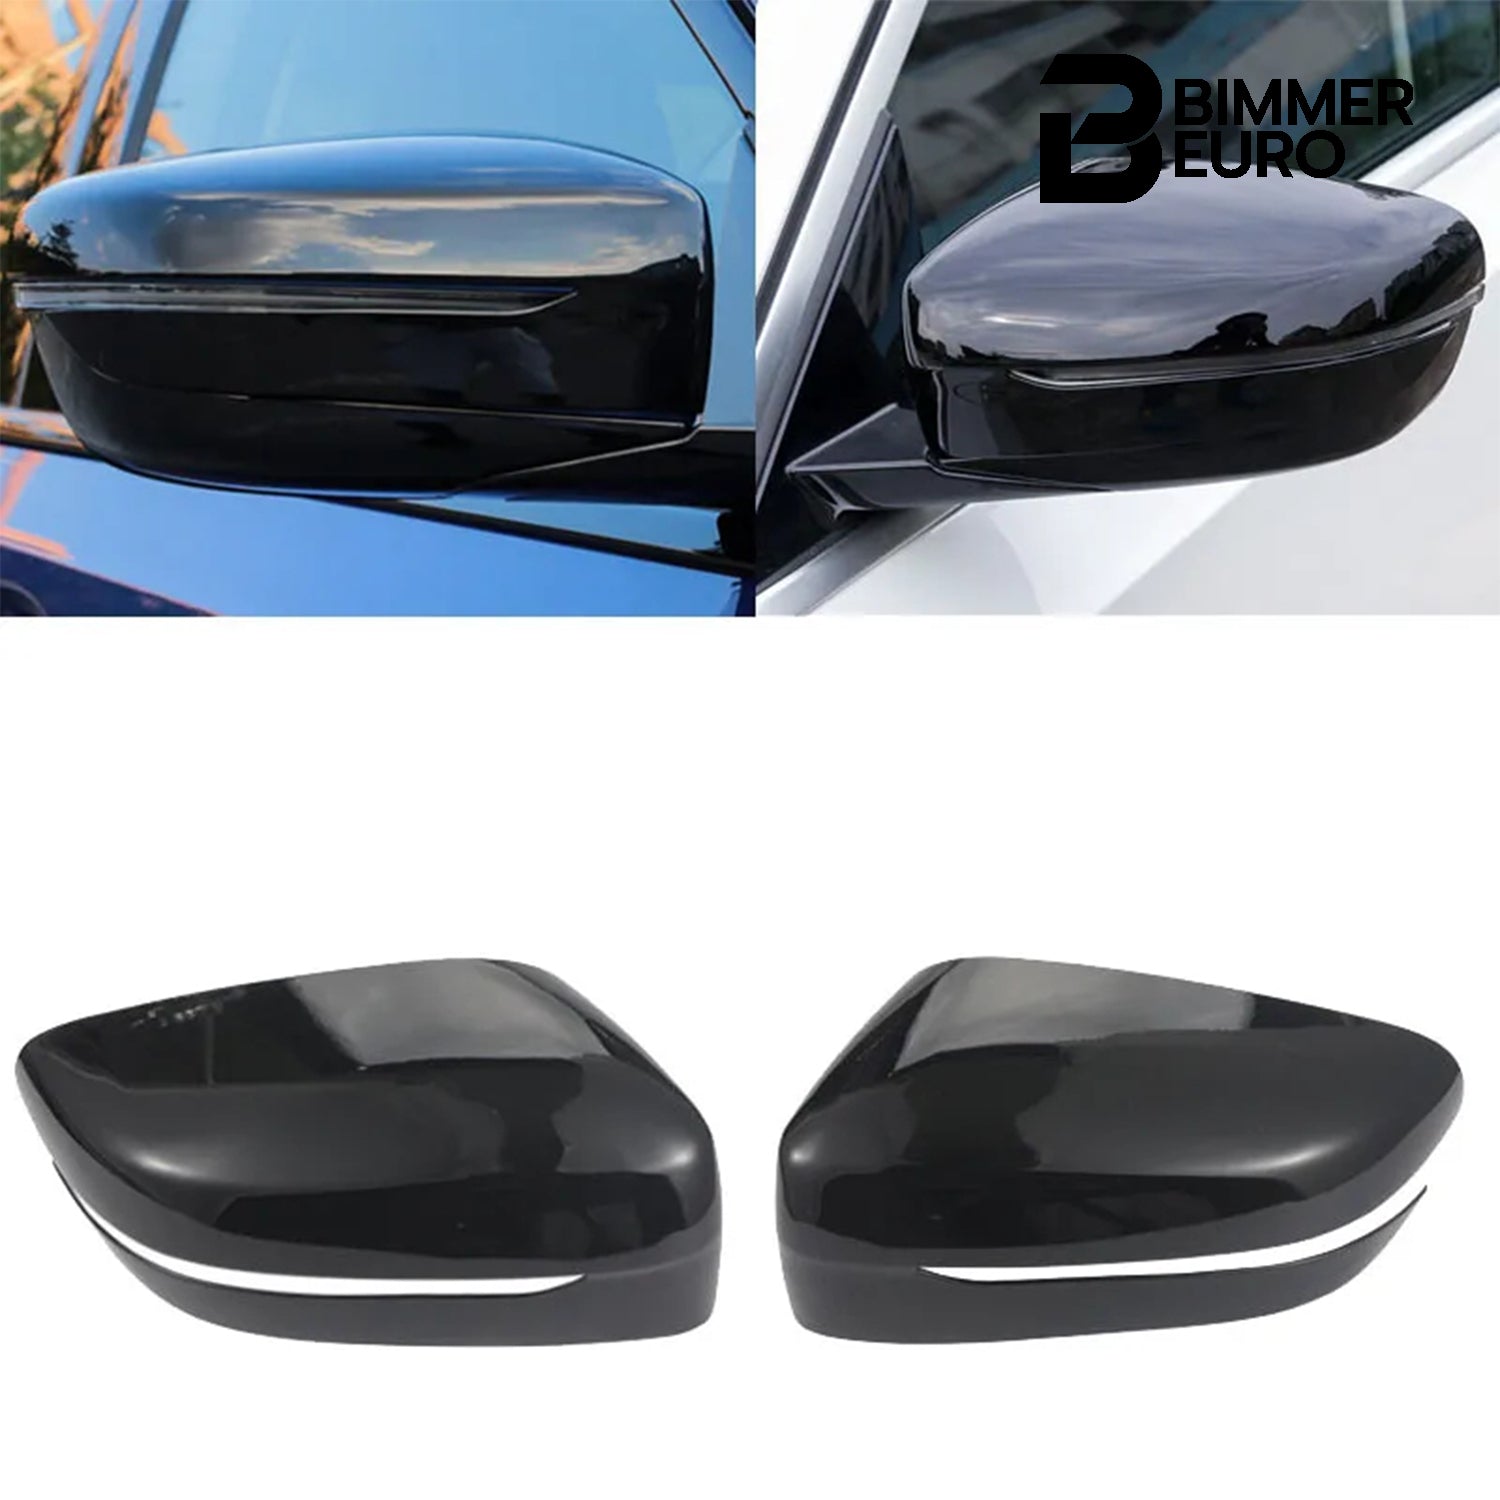 ABS Plastic OEM Style Mirror Caps for G Chassis